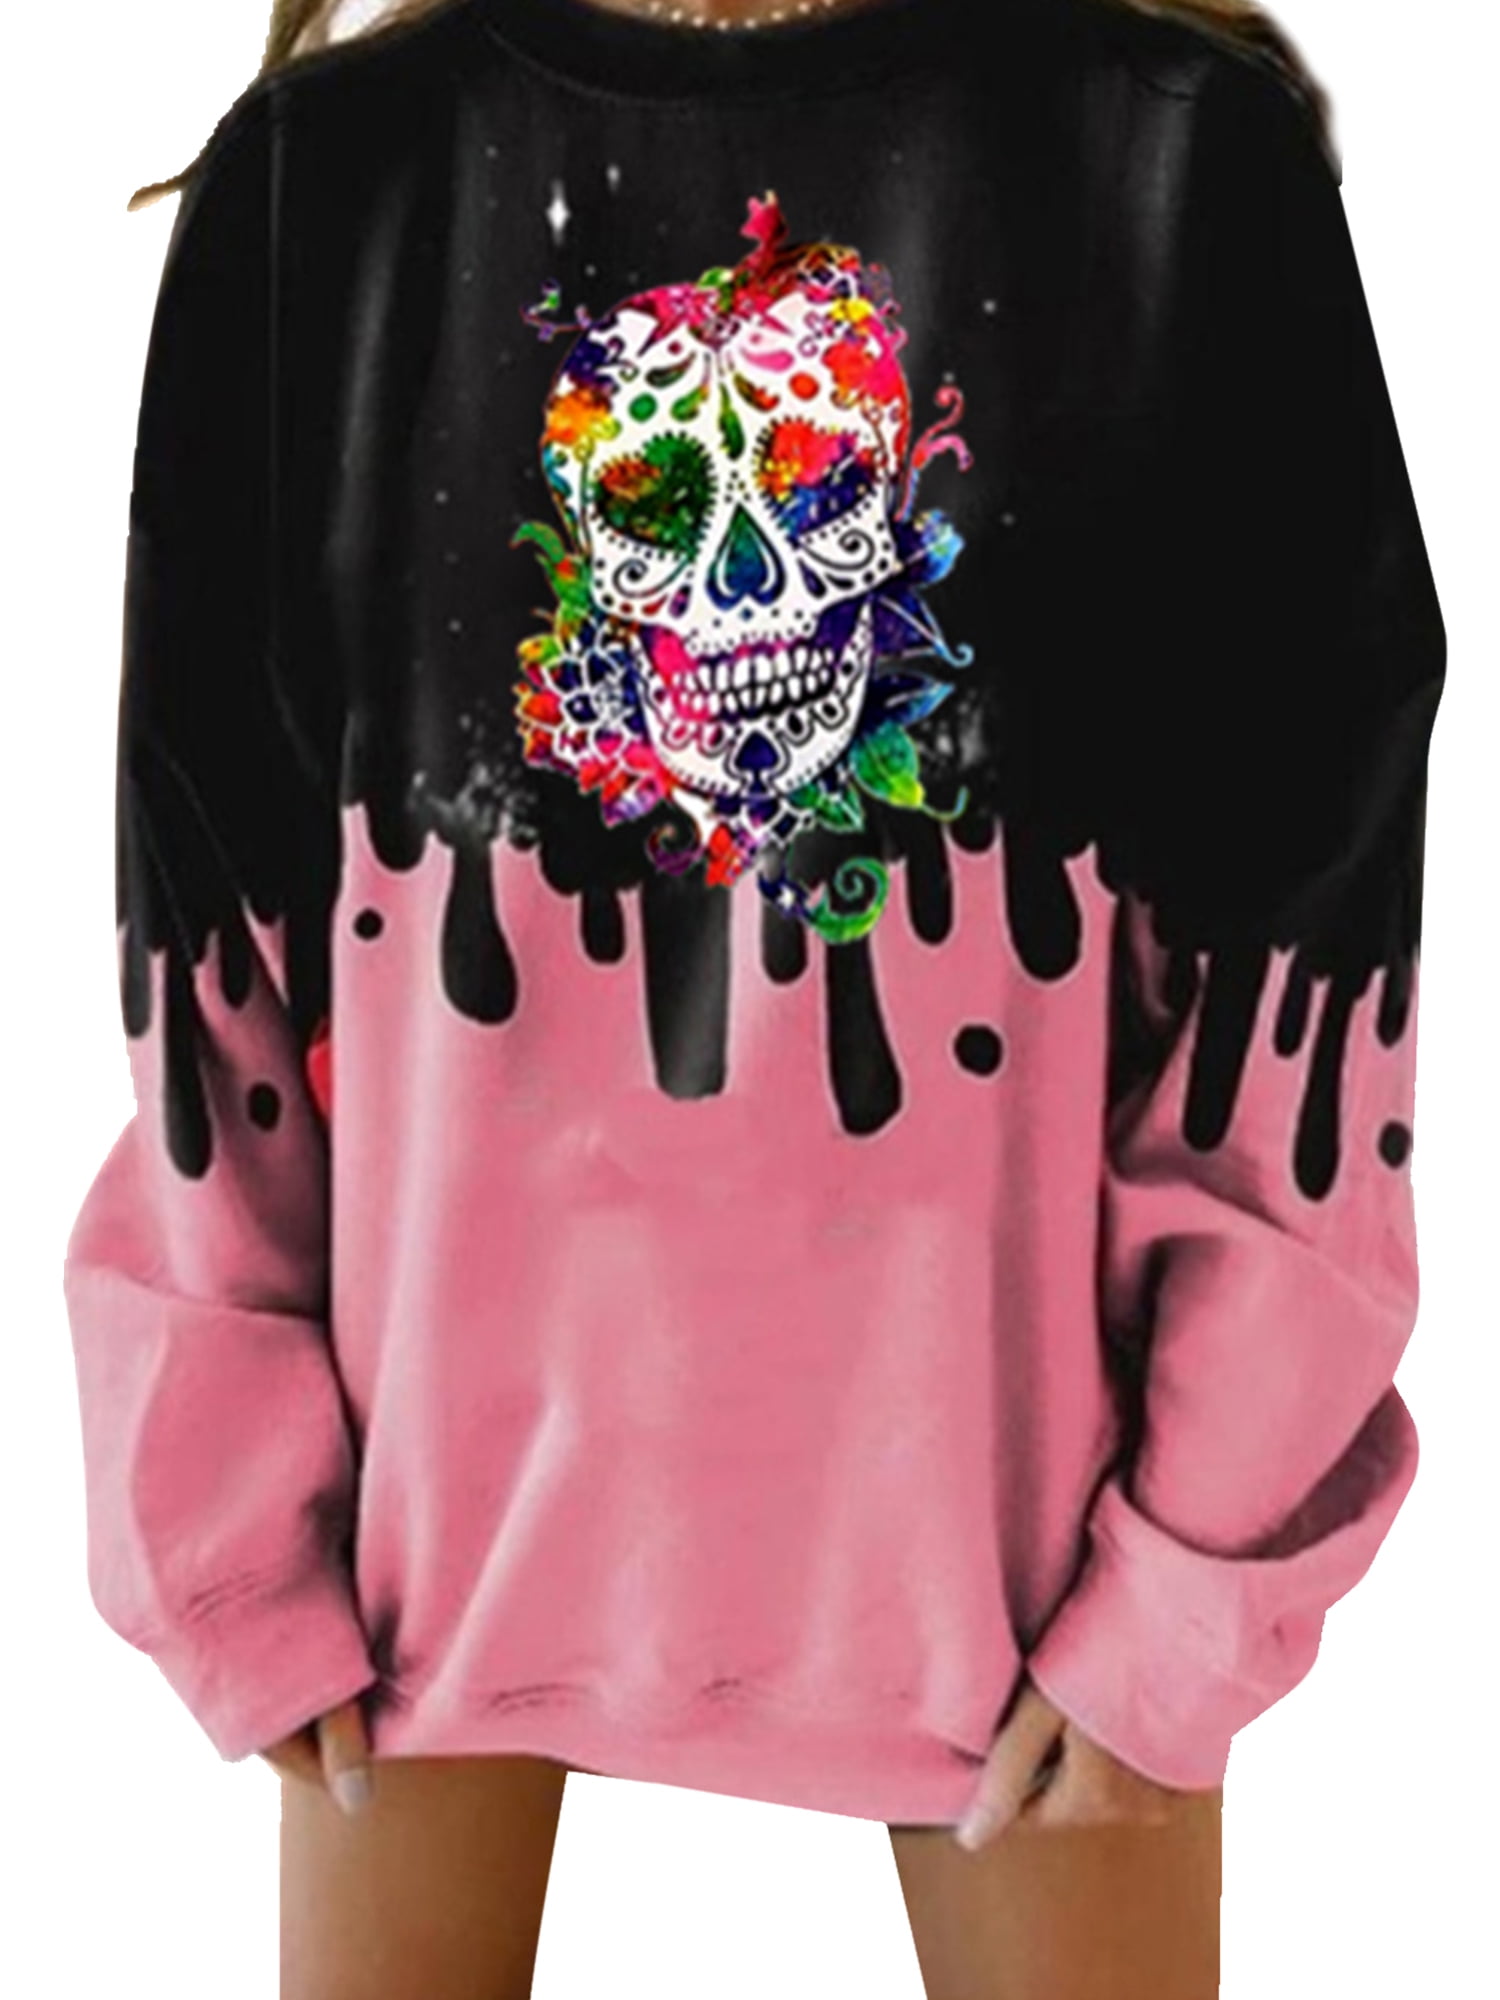 Rock Band Limited Edition Hoodie Skull Rock Band All Over Printed Hoodie S-5XL